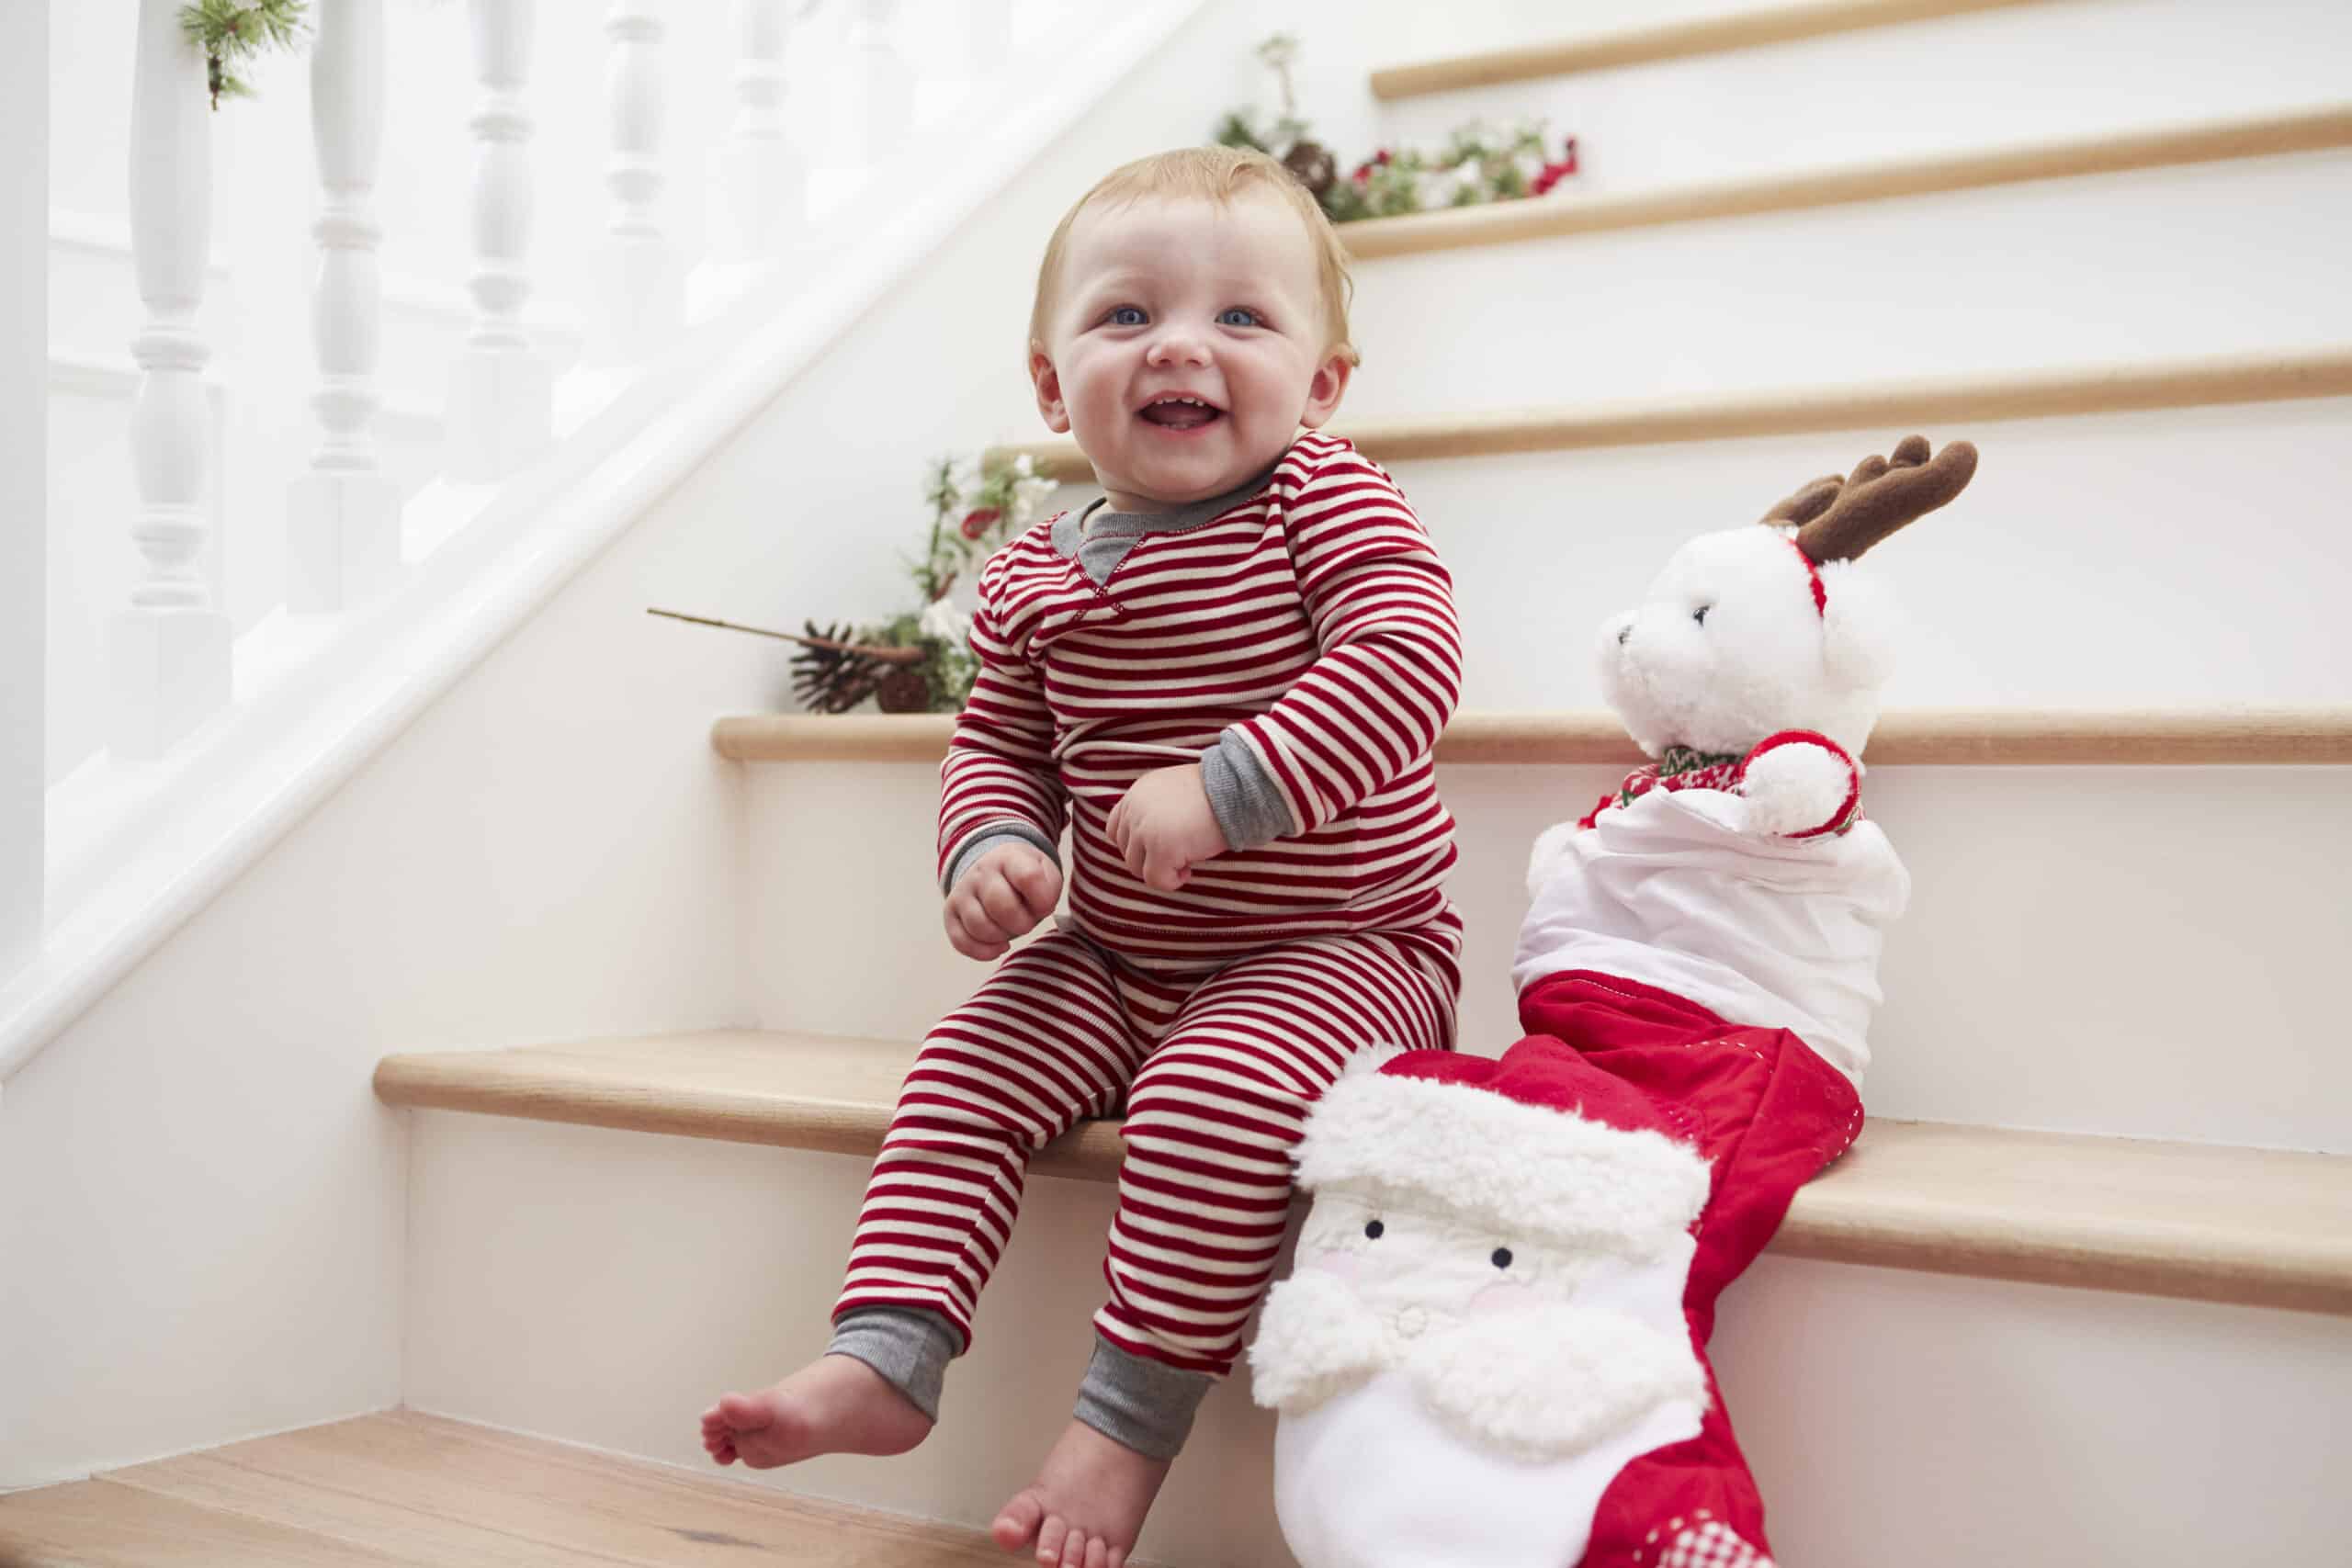 Toddler on stairs with Christmas stocking